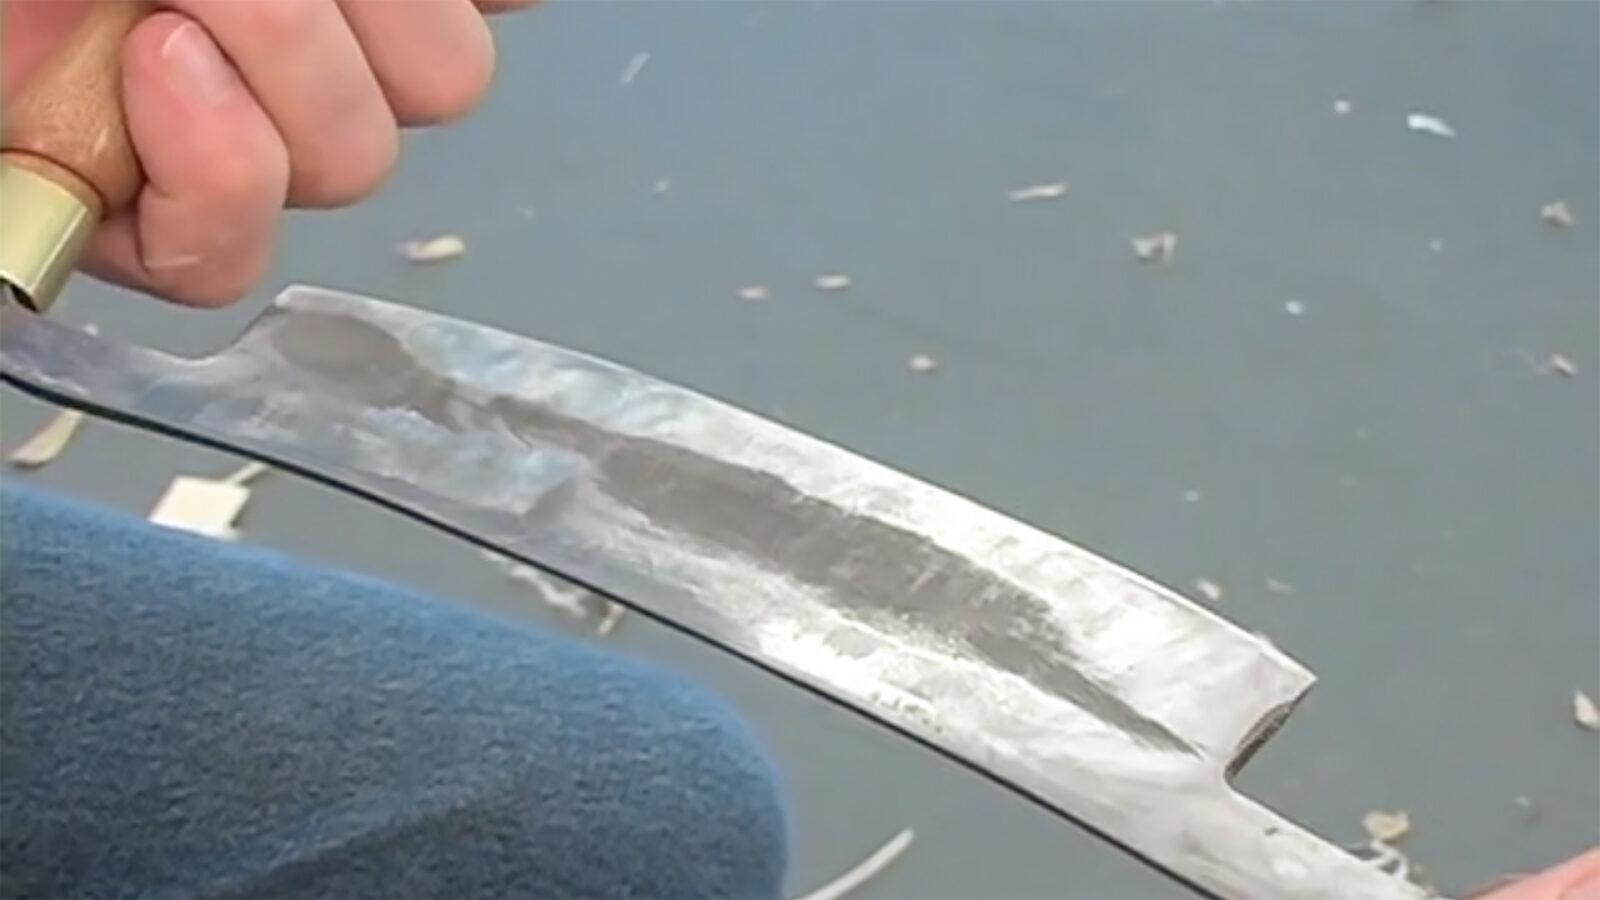 Draq knife being sharpened